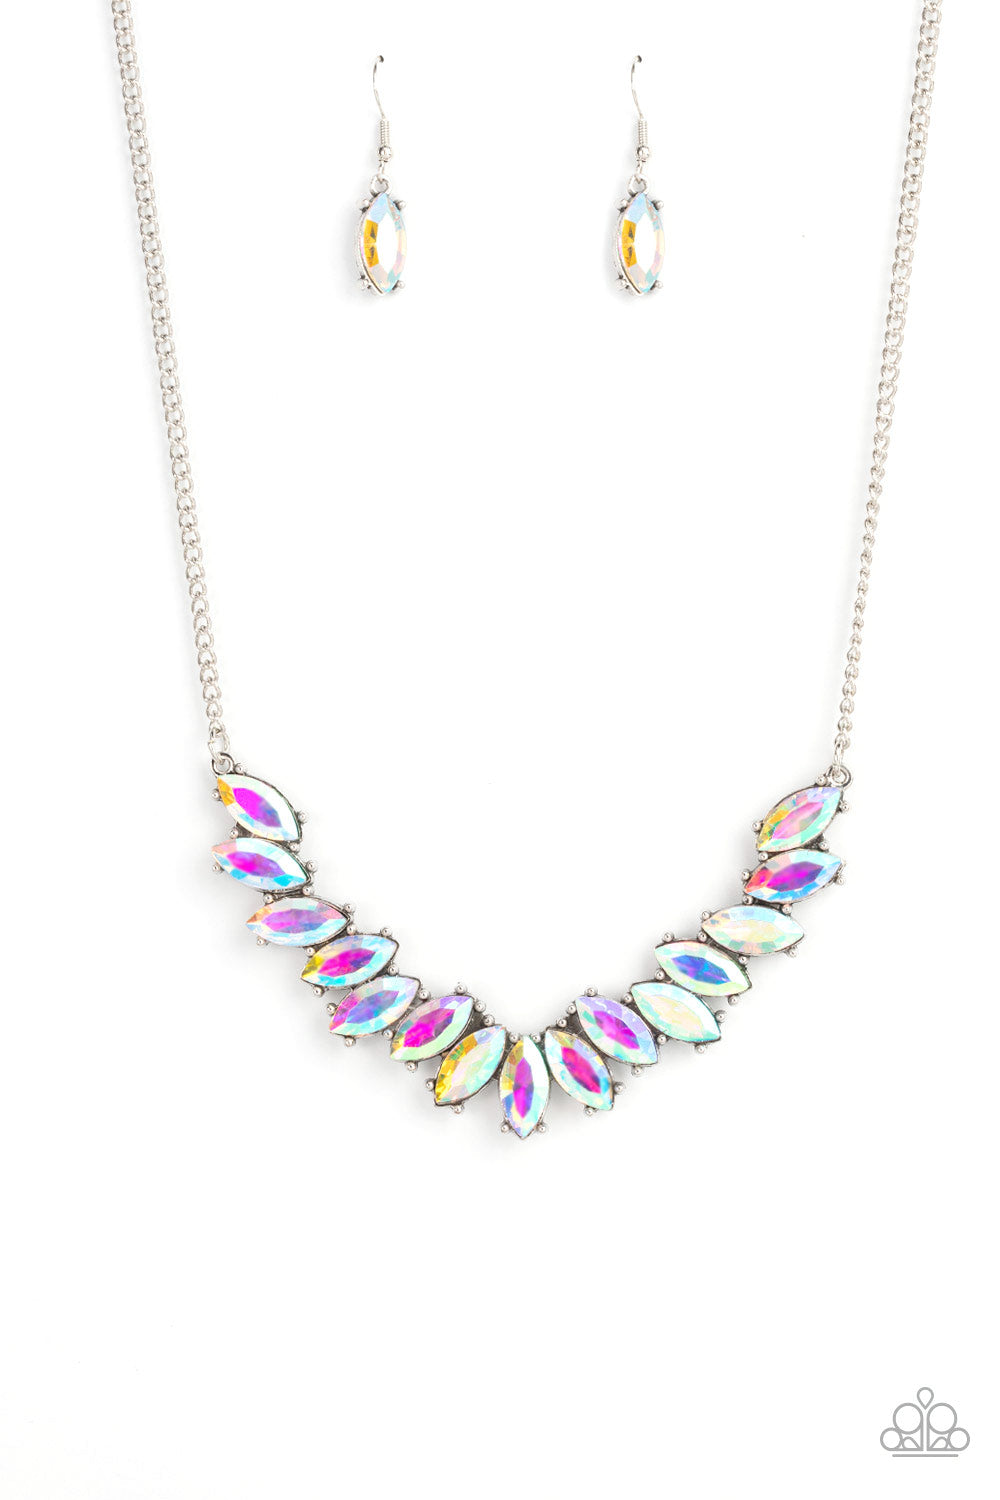 Paparazzi - Galaxy Game-Changer - Multi Iridescent Necklace - Alies Bling Bar